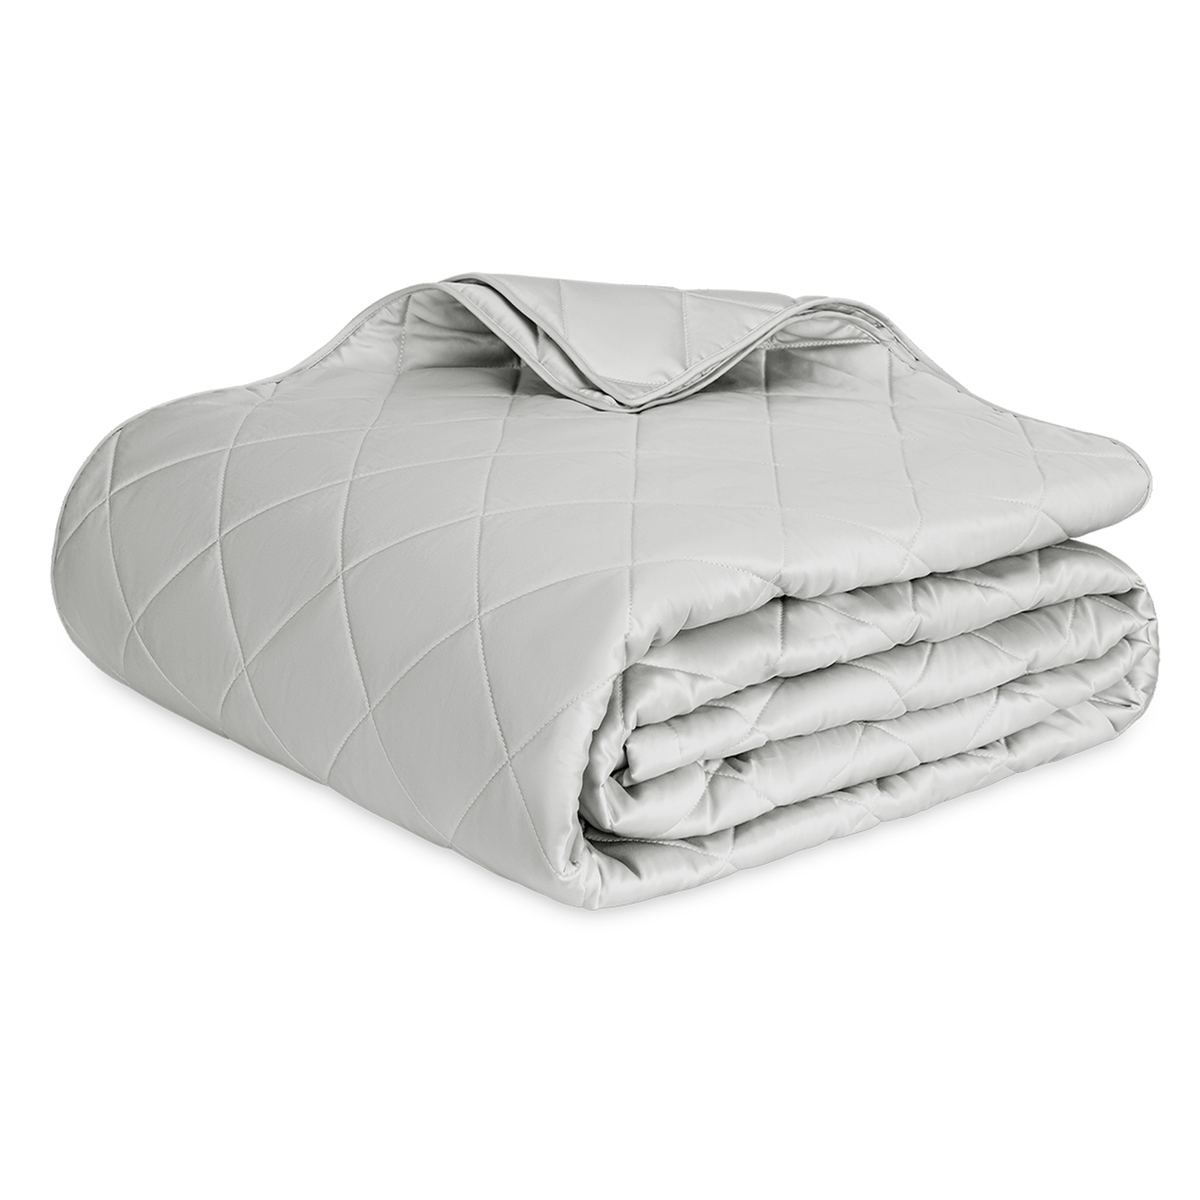 Silo Image of Matouk Nocturne Quilted Bedding Quilt in Silver